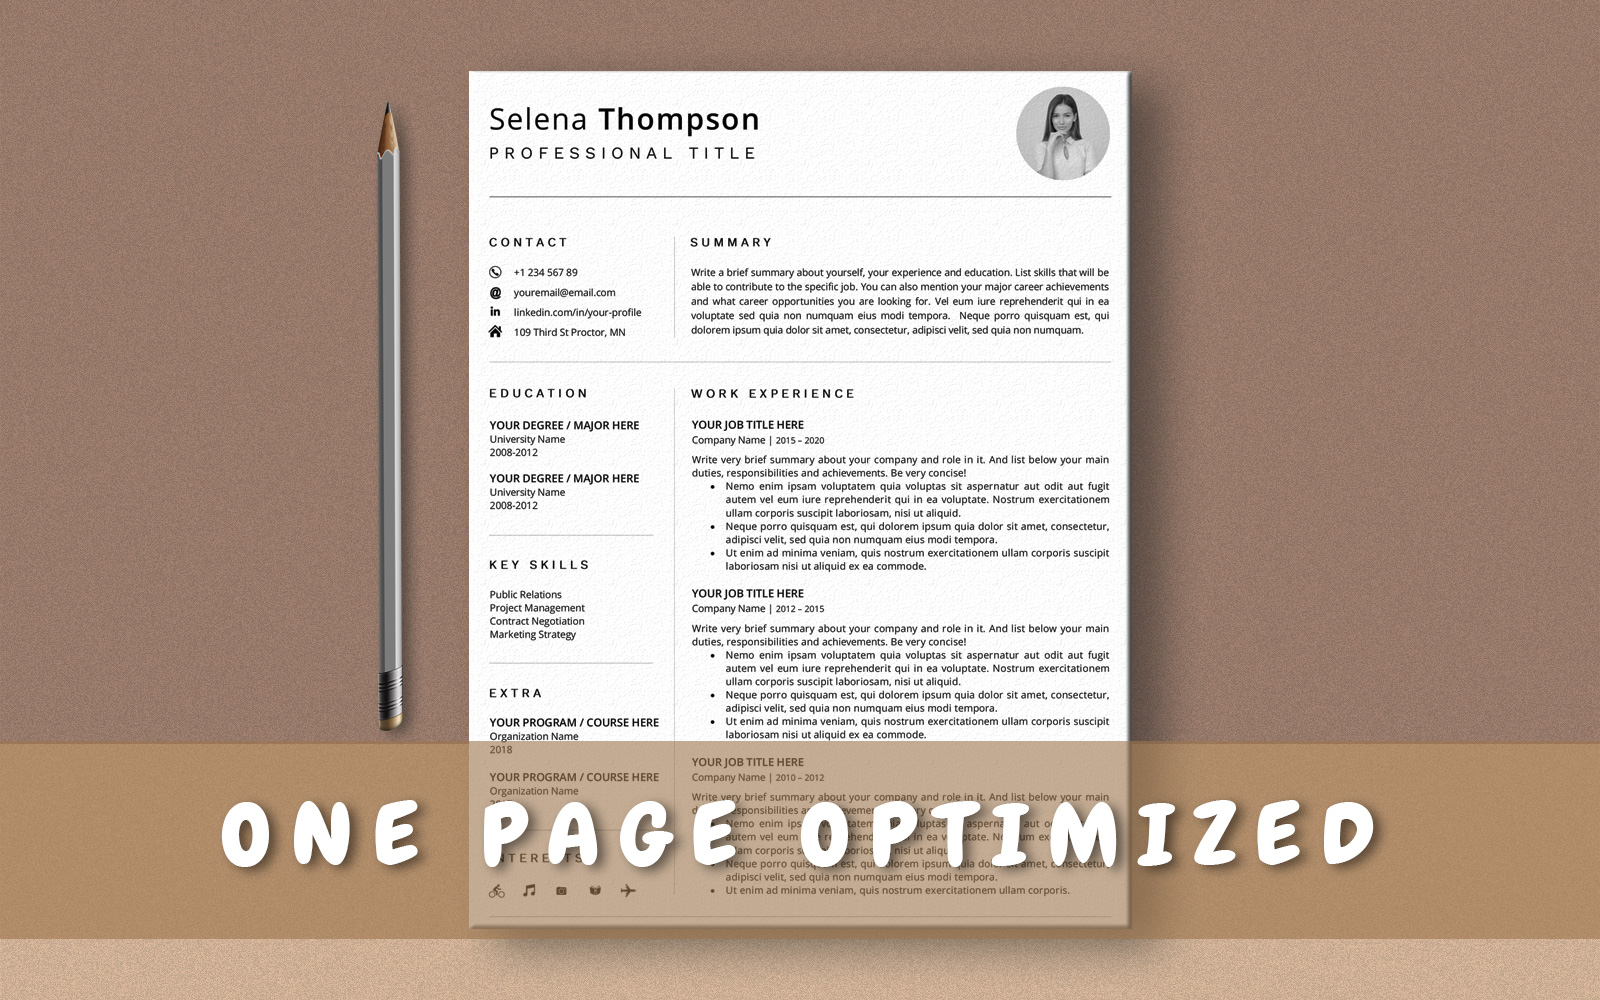 Selena Thompson One Page Resume Template